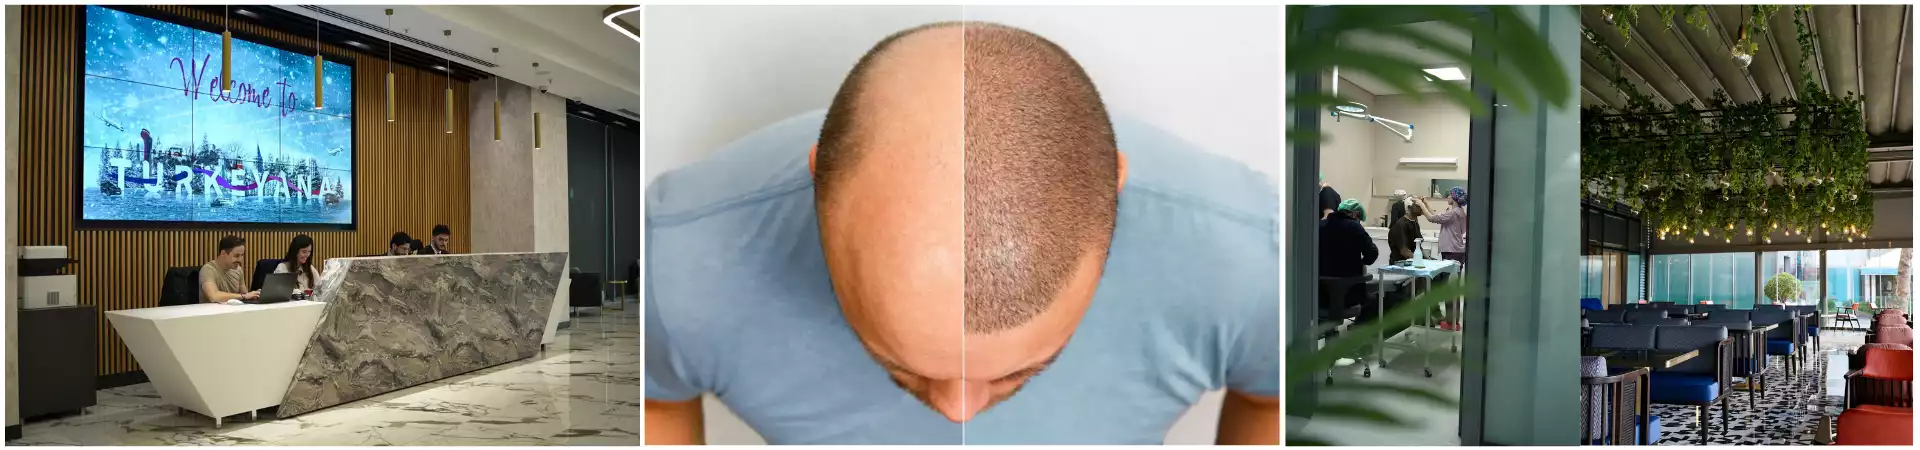 Hair Transplant 20% Off with E-pass